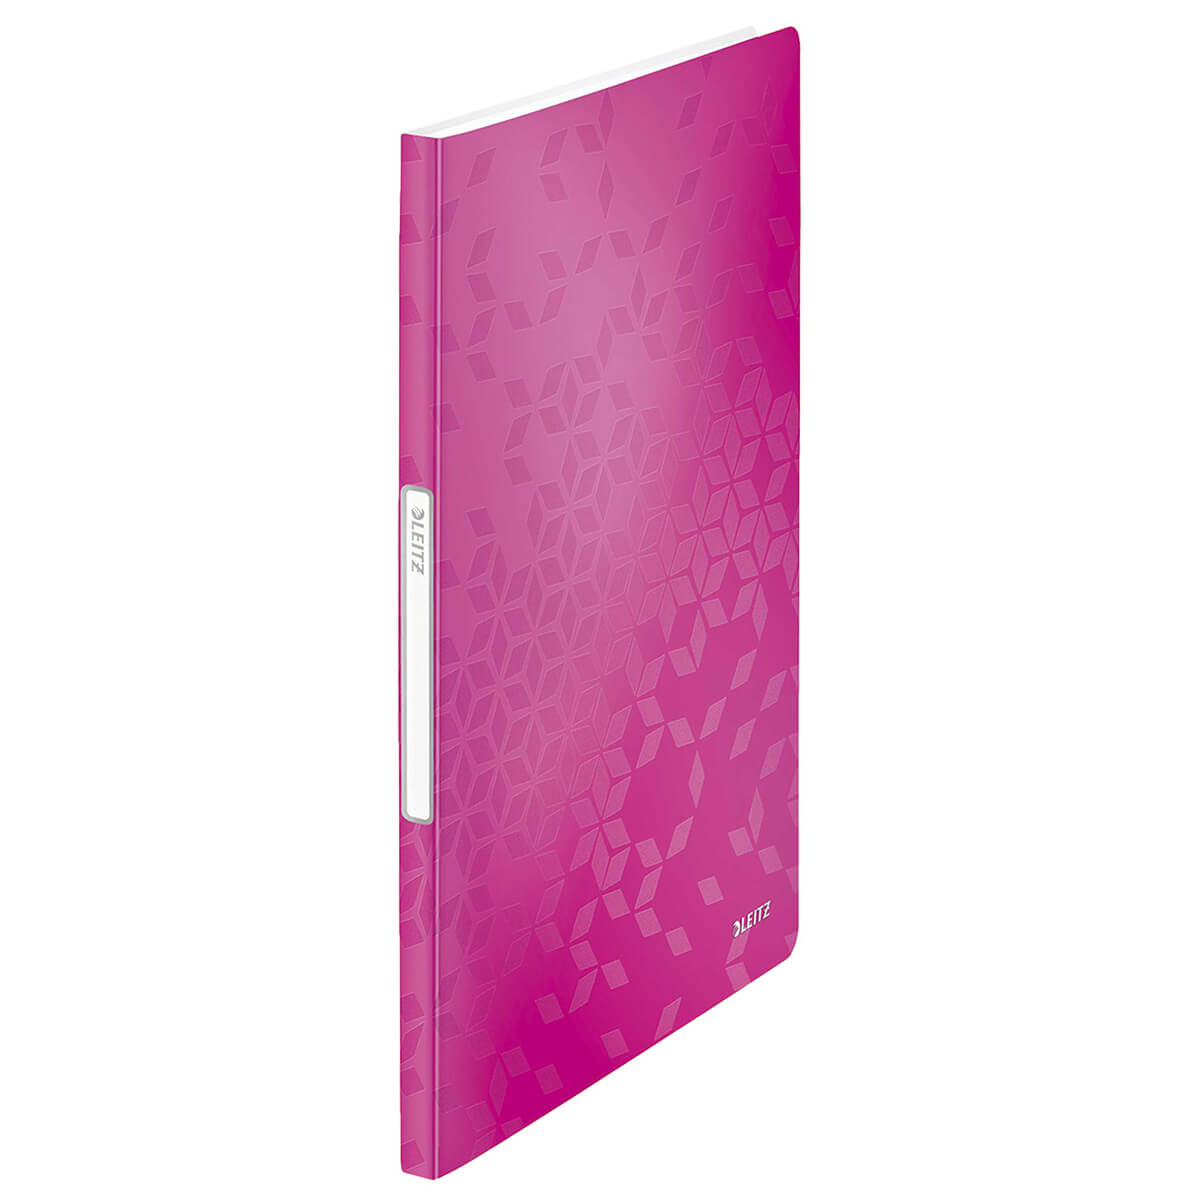 Leitz View book wow a4 pp 20 covers pink